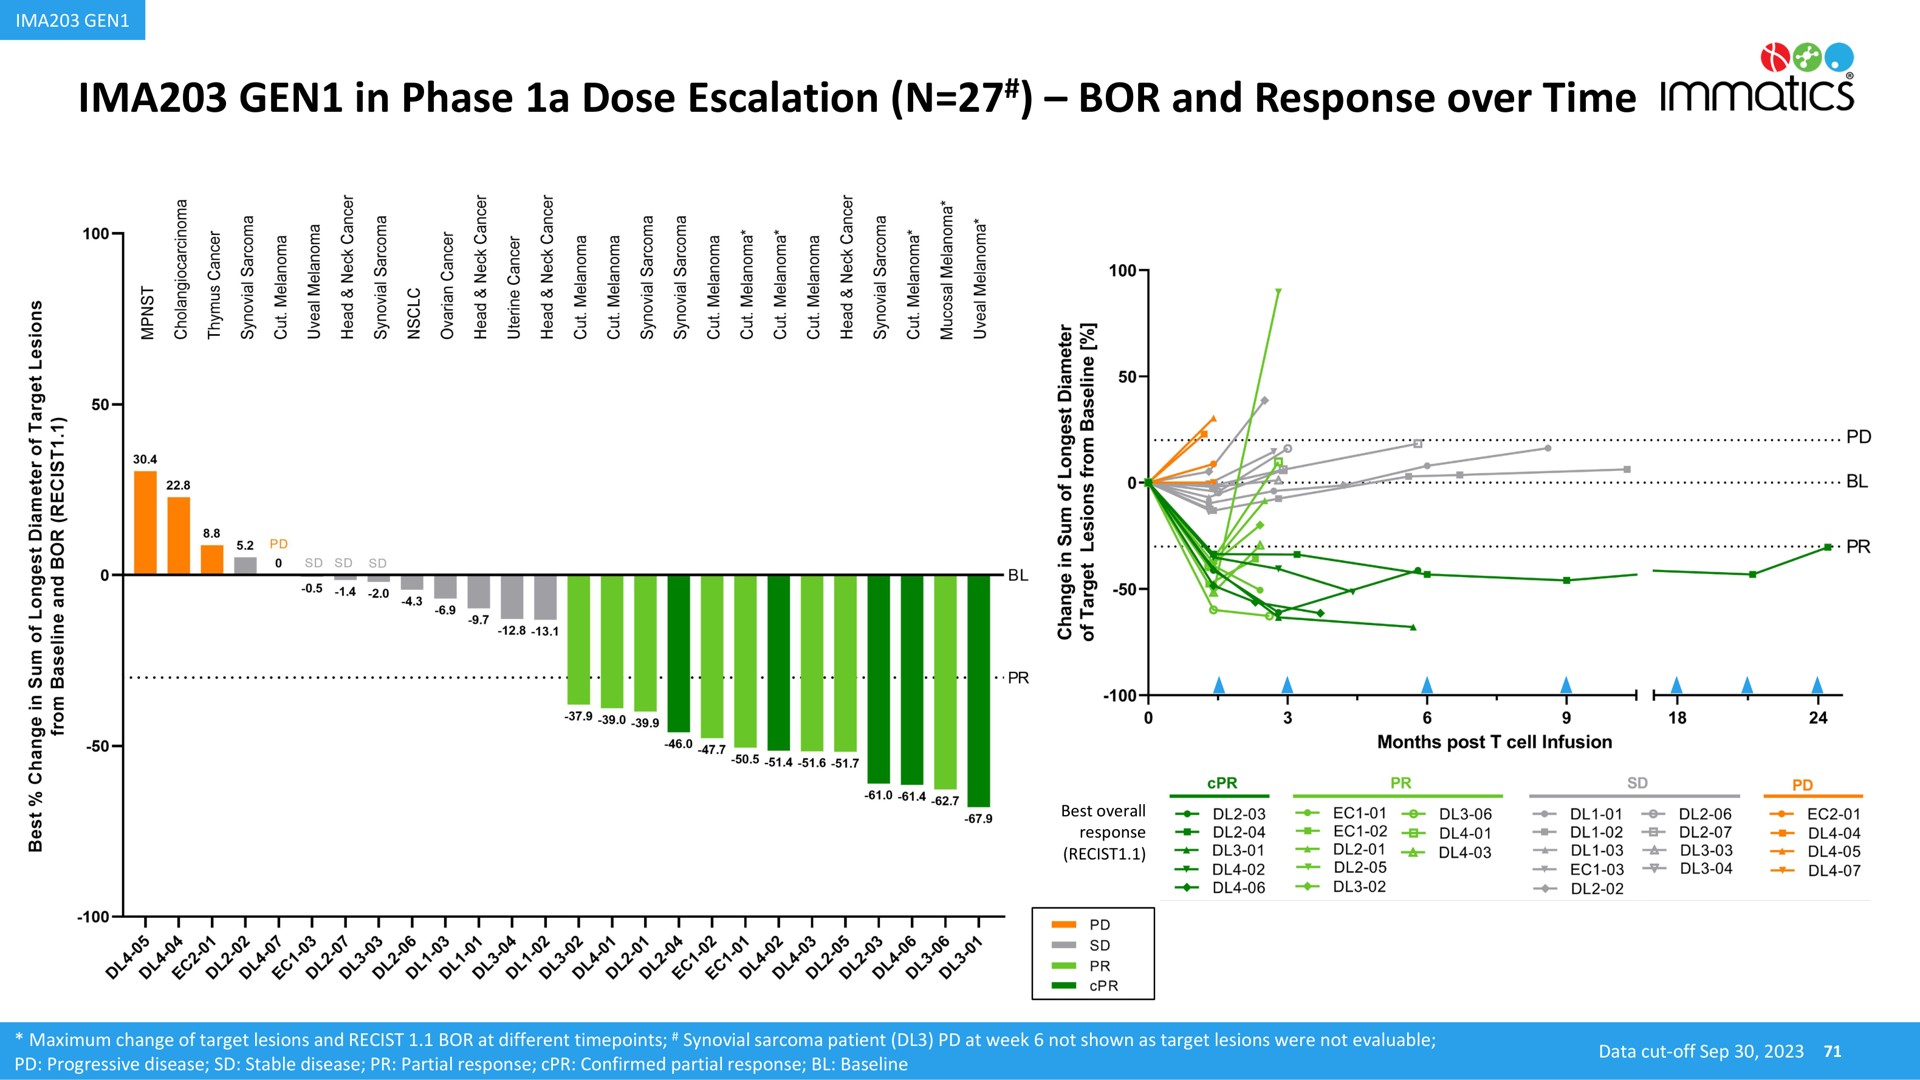 gen in phase a dose bor and response over time | Immatics